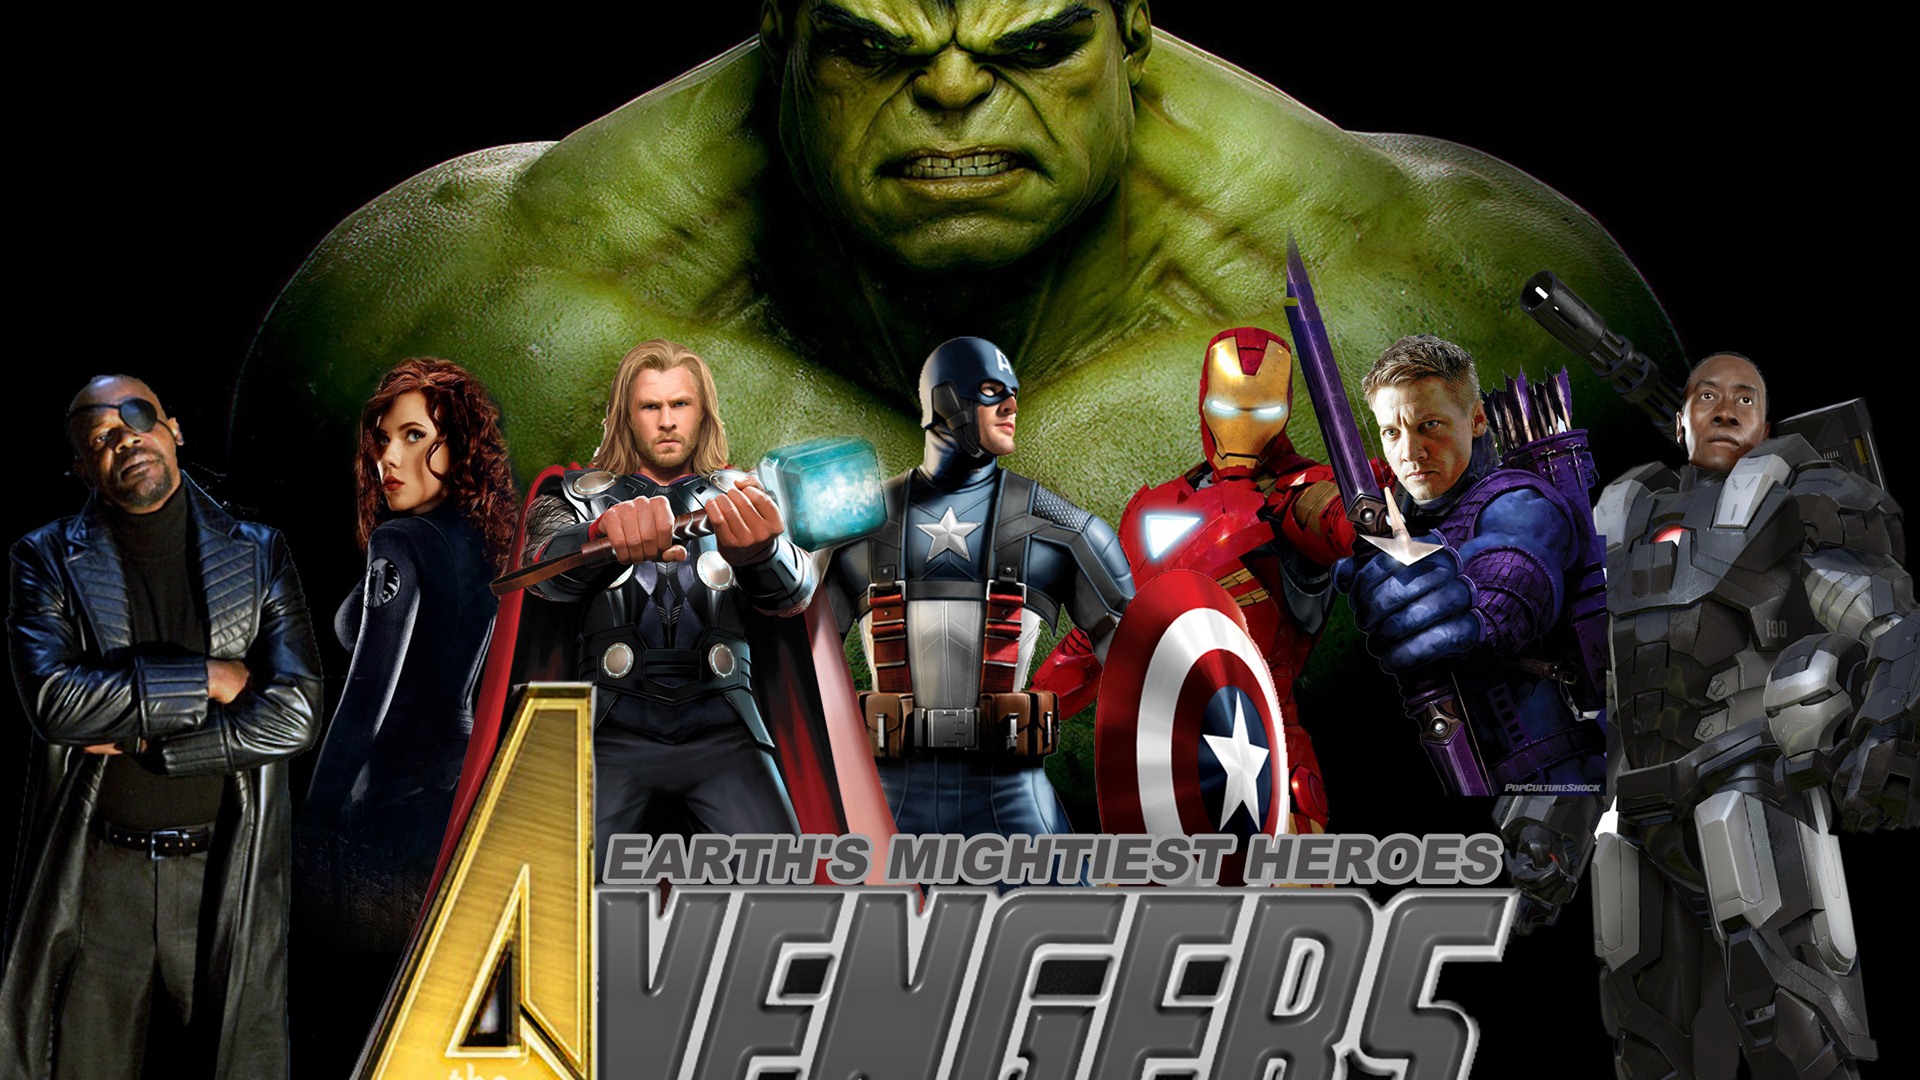 The Avengers 2012 HD wallpapers #19 - 1920x1080